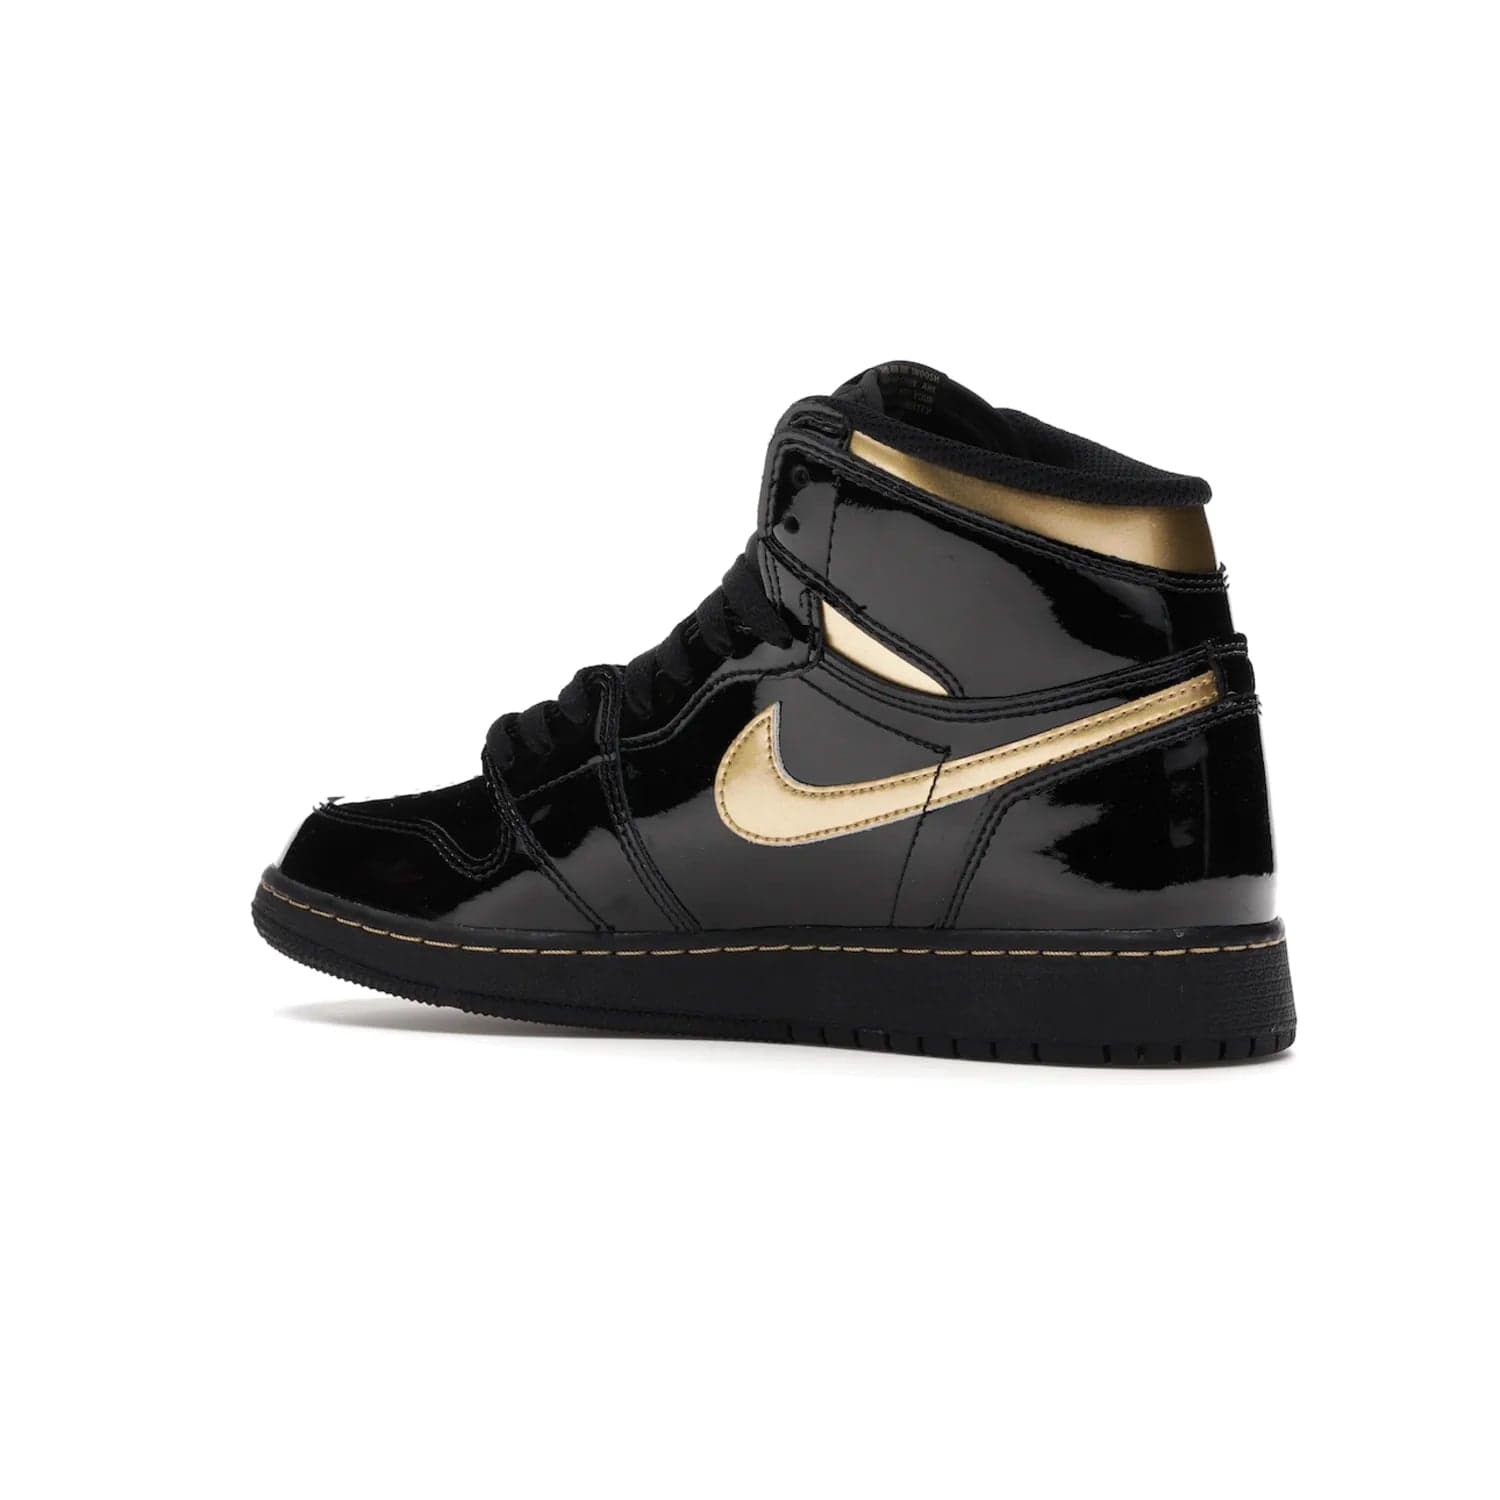 Jordan 1 Retro High Black Metallic Gold (2020) (GS) - Image 22 - Only at www.BallersClubKickz.com - Shop the Kids Air Jordan 1 Retro High in Black Metallic Gold for a stylish and comfortable sneaker kids can love. Featuring black and metallic gold patent leather uppers, metallic gold accents, and an Air sole unit for extra cushioning.